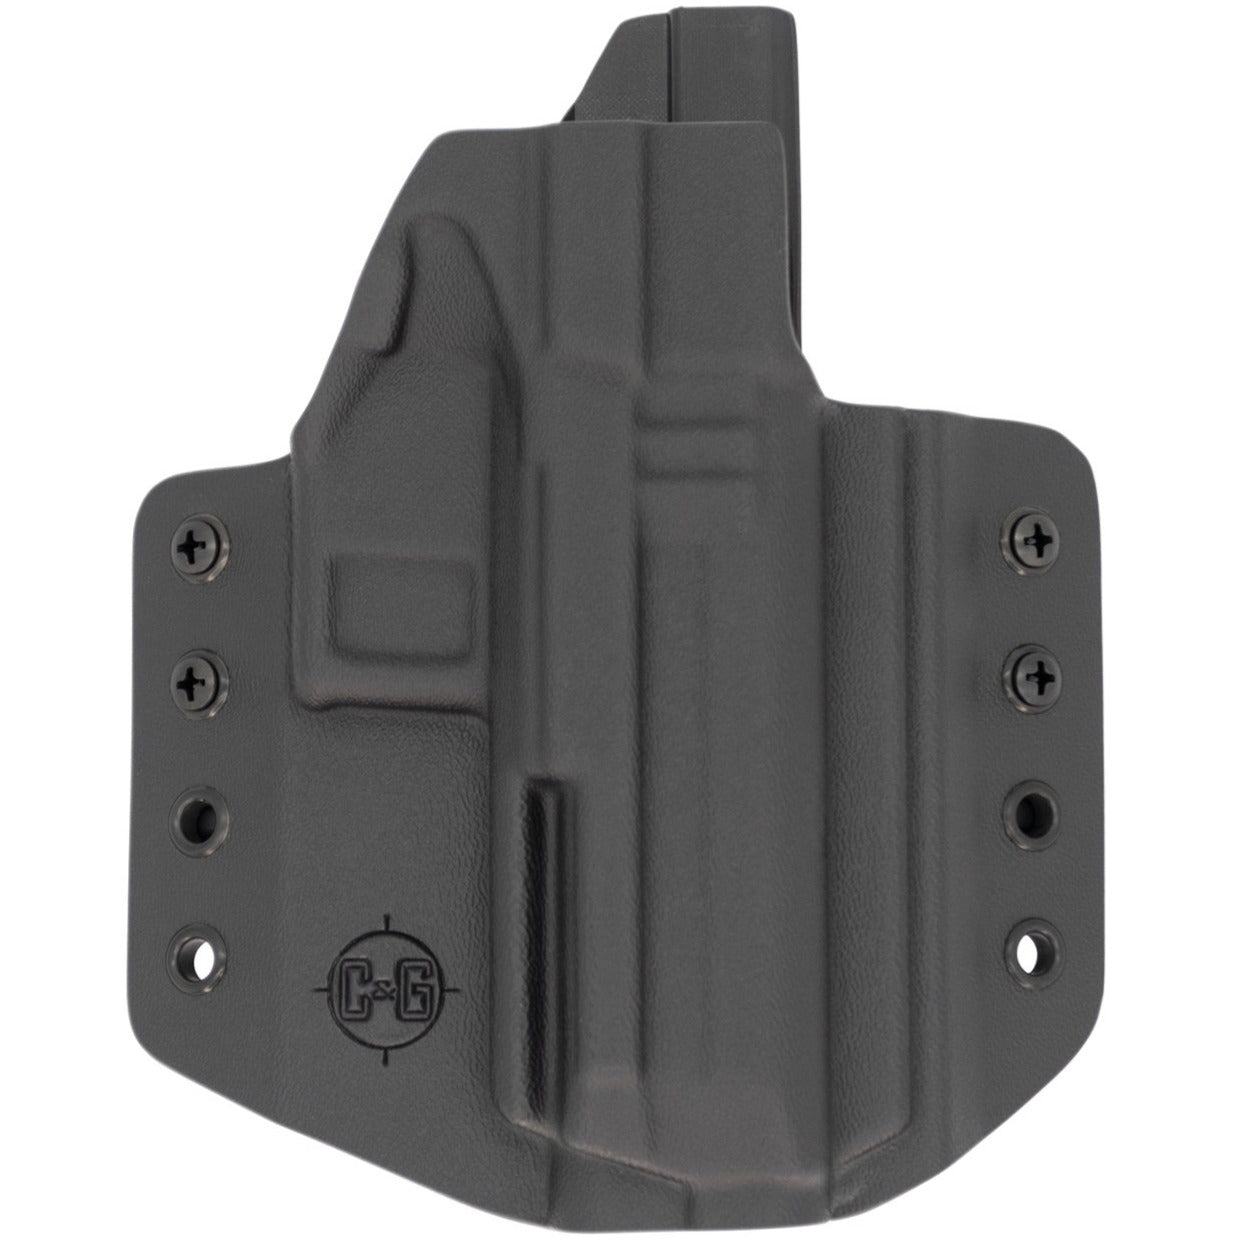 This is a custom C&G Holsters Covert Series Outside the waistband holster for an IWI Masada 9mm firearm showing the front without the gun. 